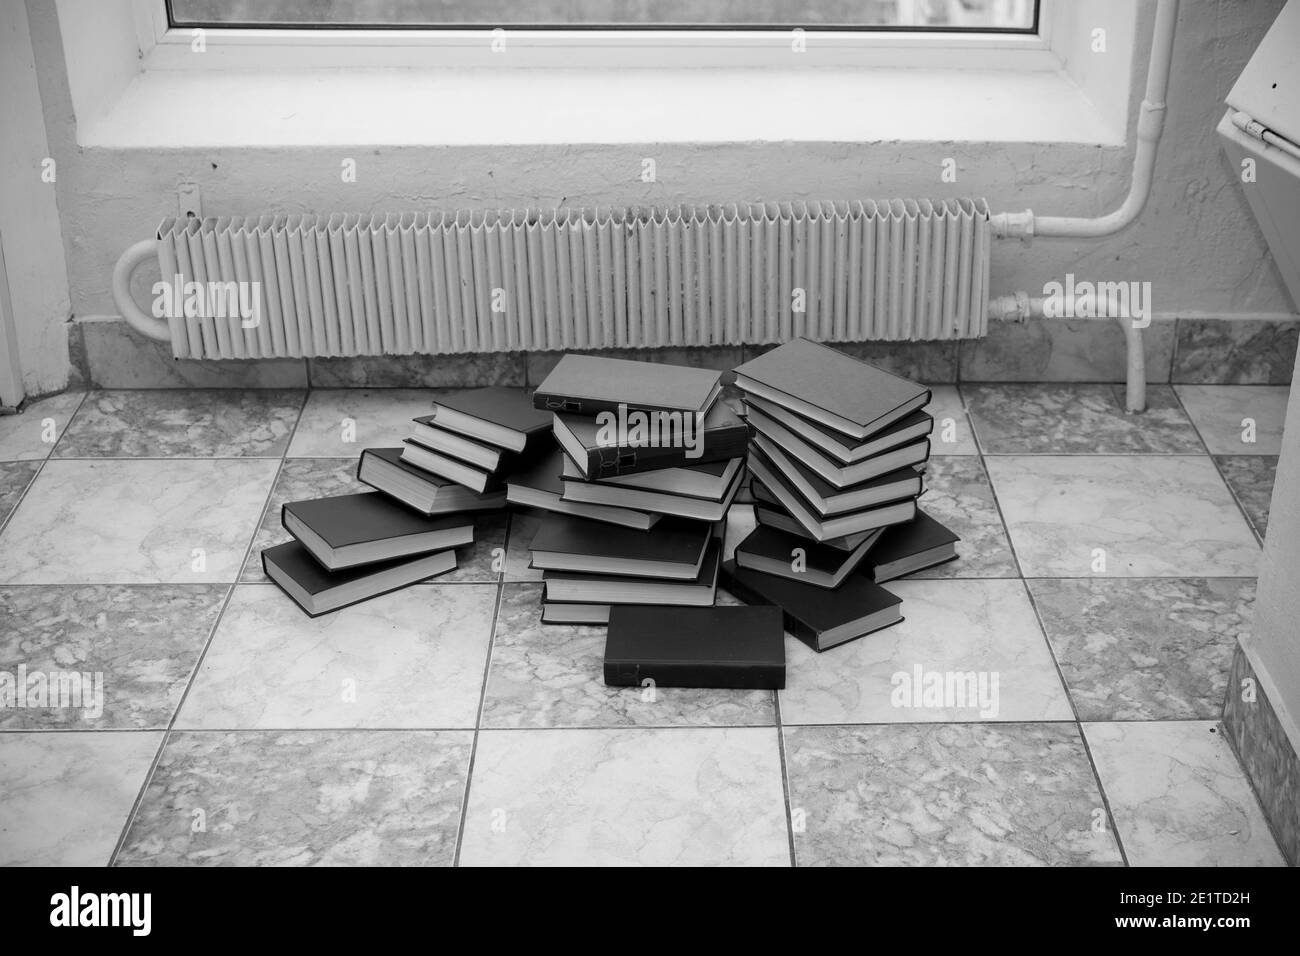 Pile of discarded old books on the tiled floor, in black and white Stock Photo